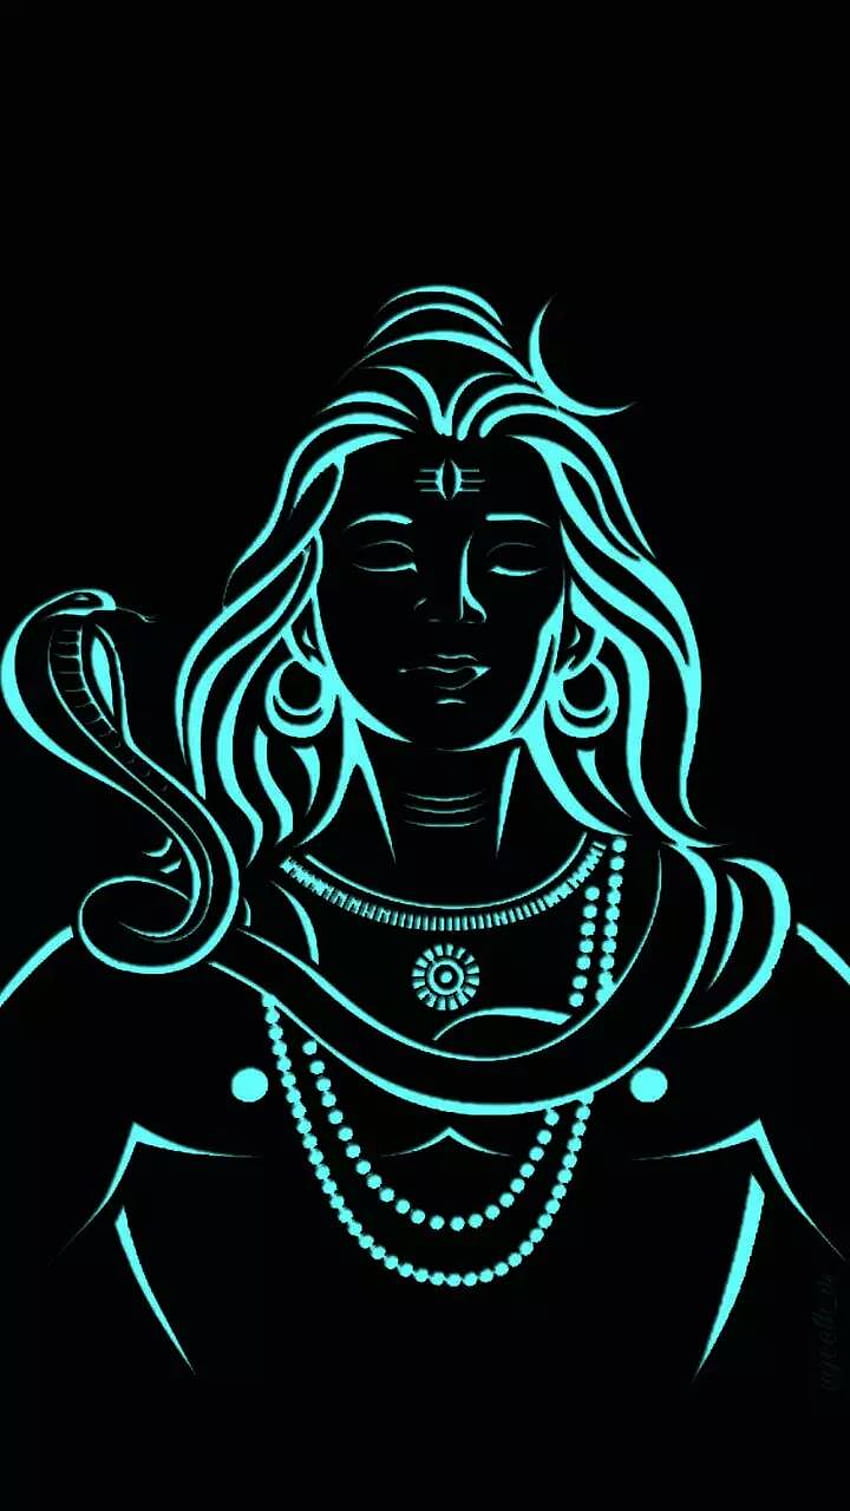 How to draw a sketch of Lord Shiva  Lord Shiva drawing step by step   YouTube